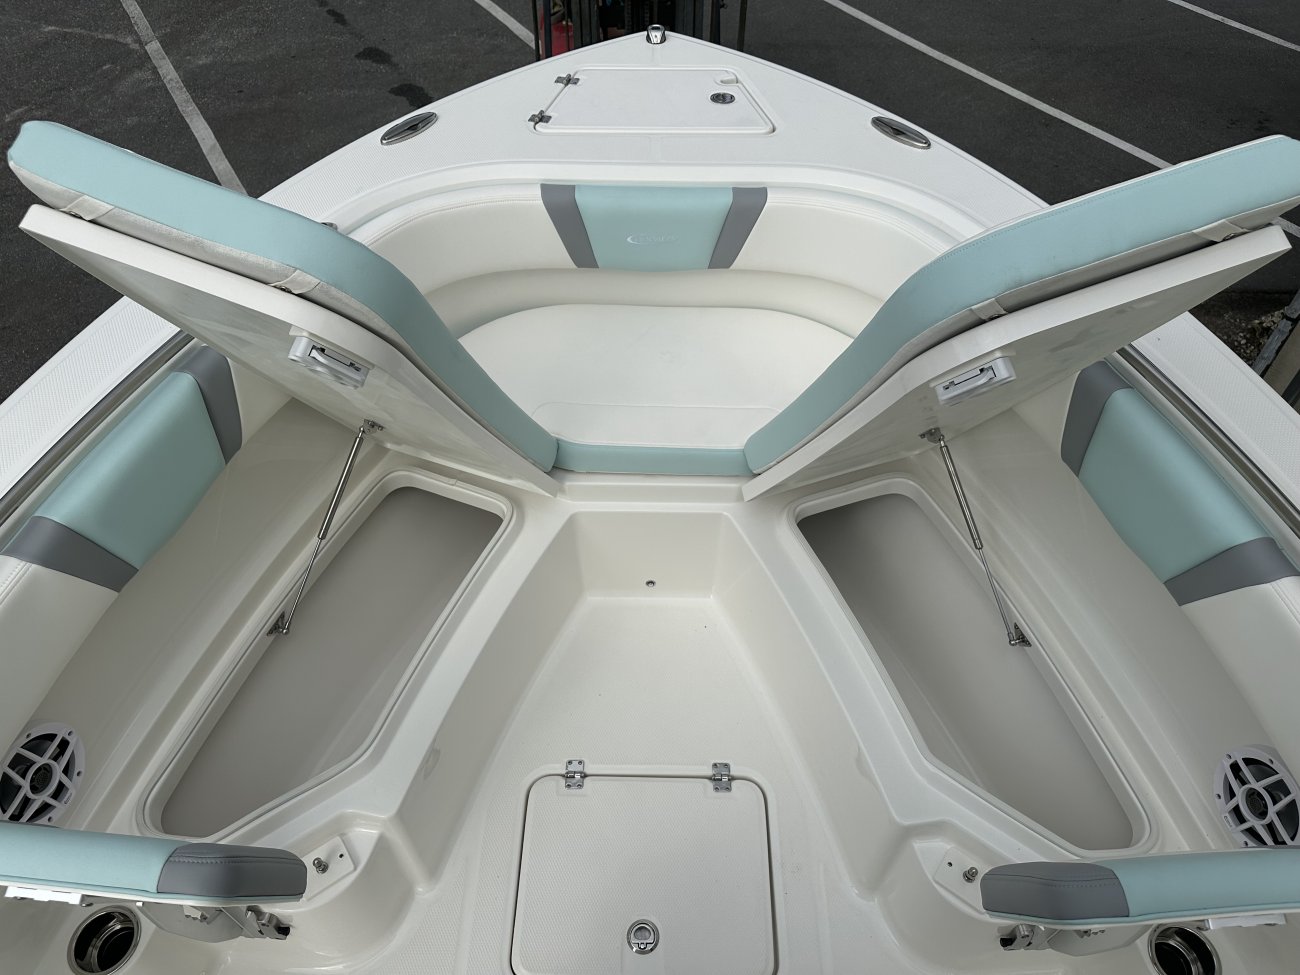 A R232 Explorer is a Power and could be classed as a Bay Boat, Center Console, Freshwater Fishing, Saltwater Fishing, Runabout,  or, just an overall Great Boat!